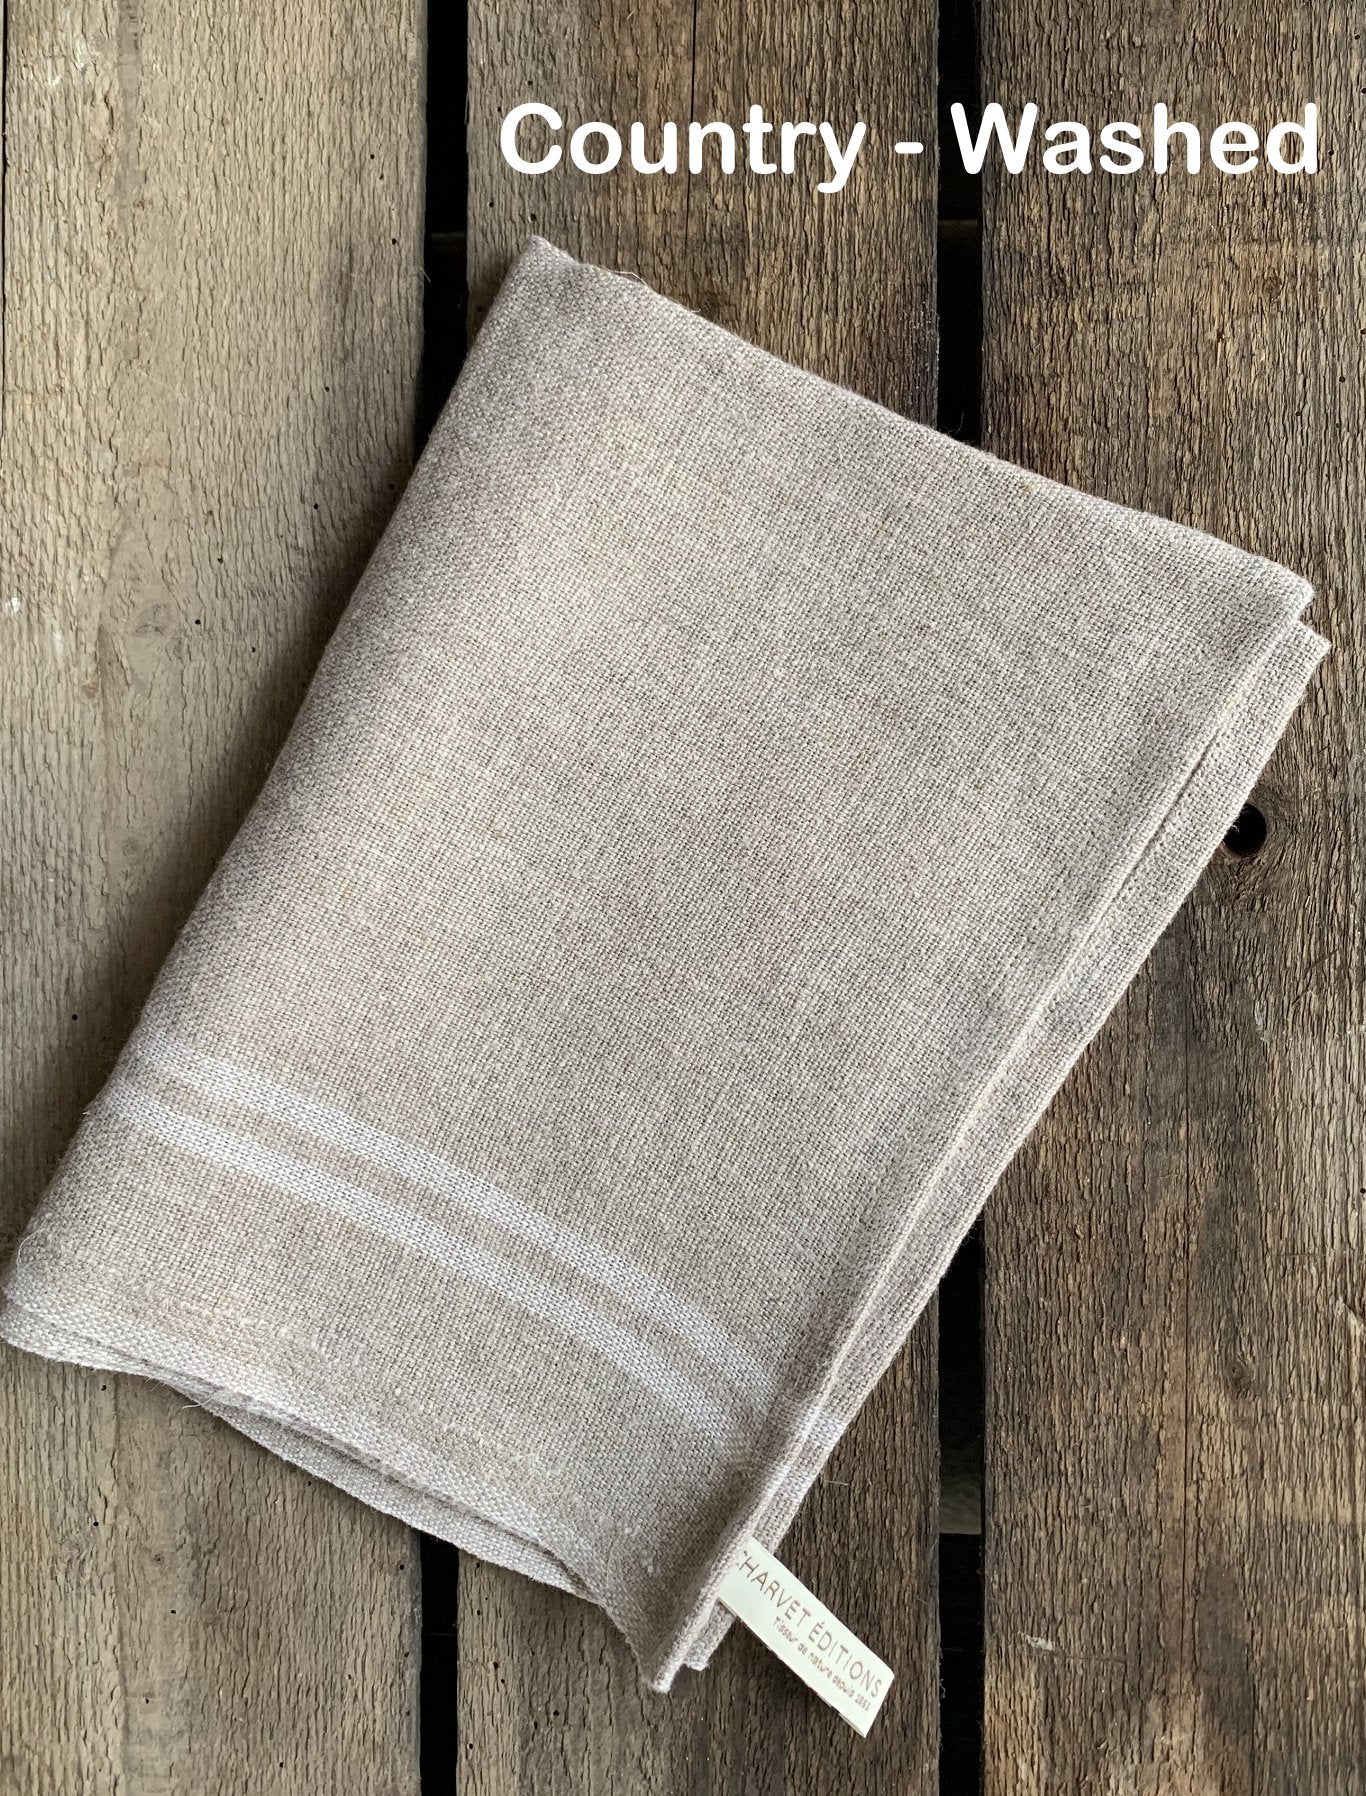 Charvet Éditions "Country Washed" (Écru), Natural woven linen tea towel. Made in France.